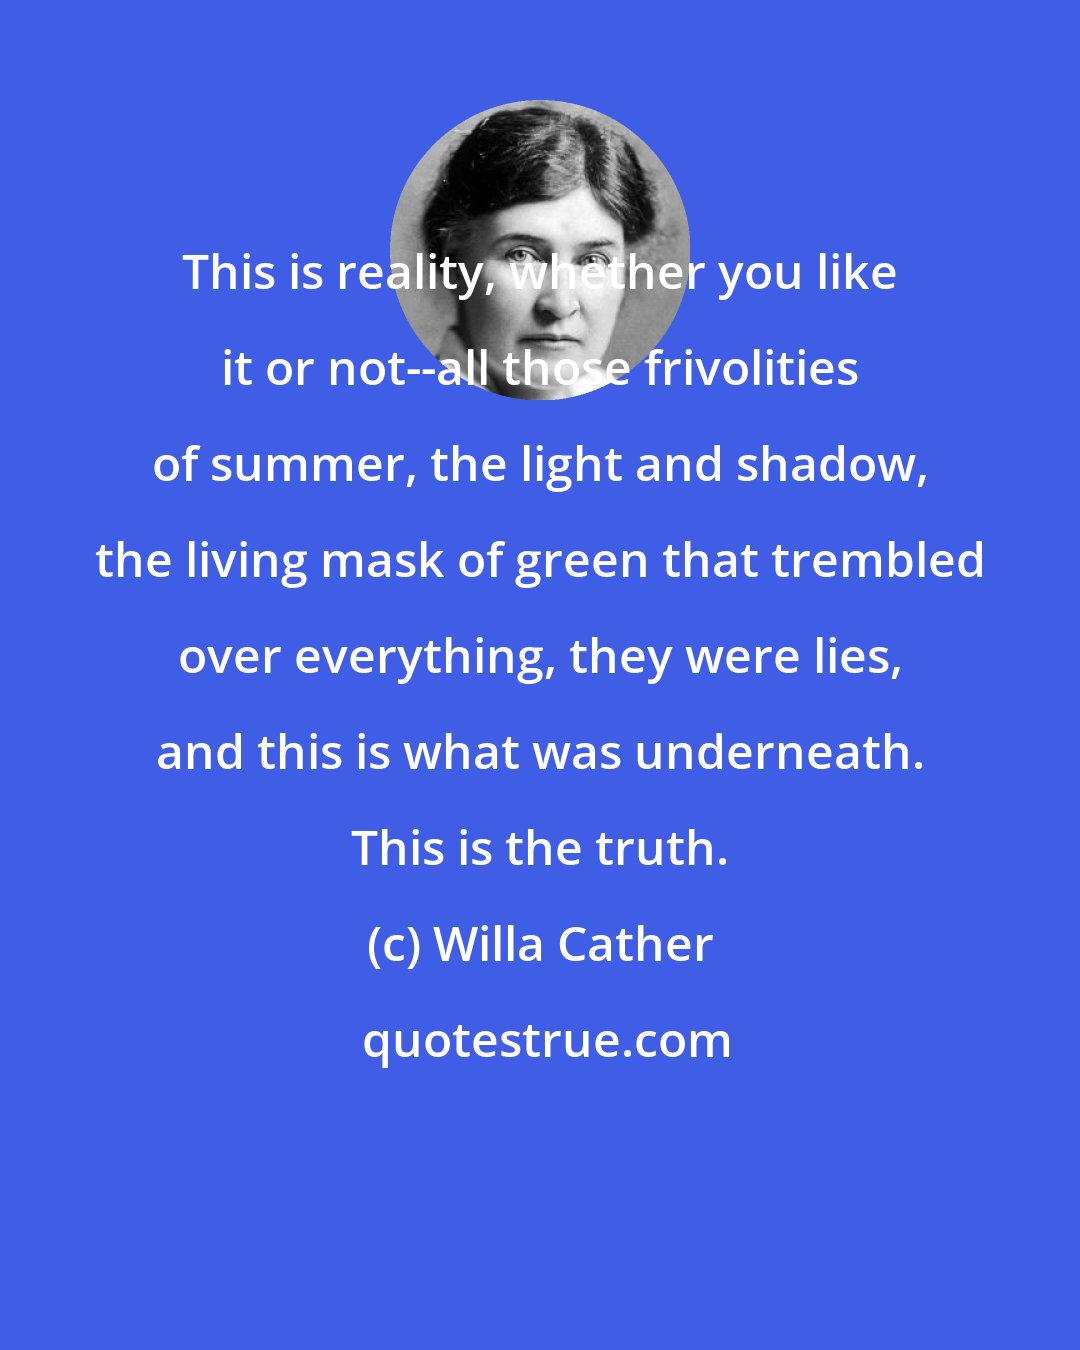 Willa Cather: This is reality, whether you like it or not--all those frivolities of summer, the light and shadow, the living mask of green that trembled over everything, they were lies, and this is what was underneath. This is the truth.